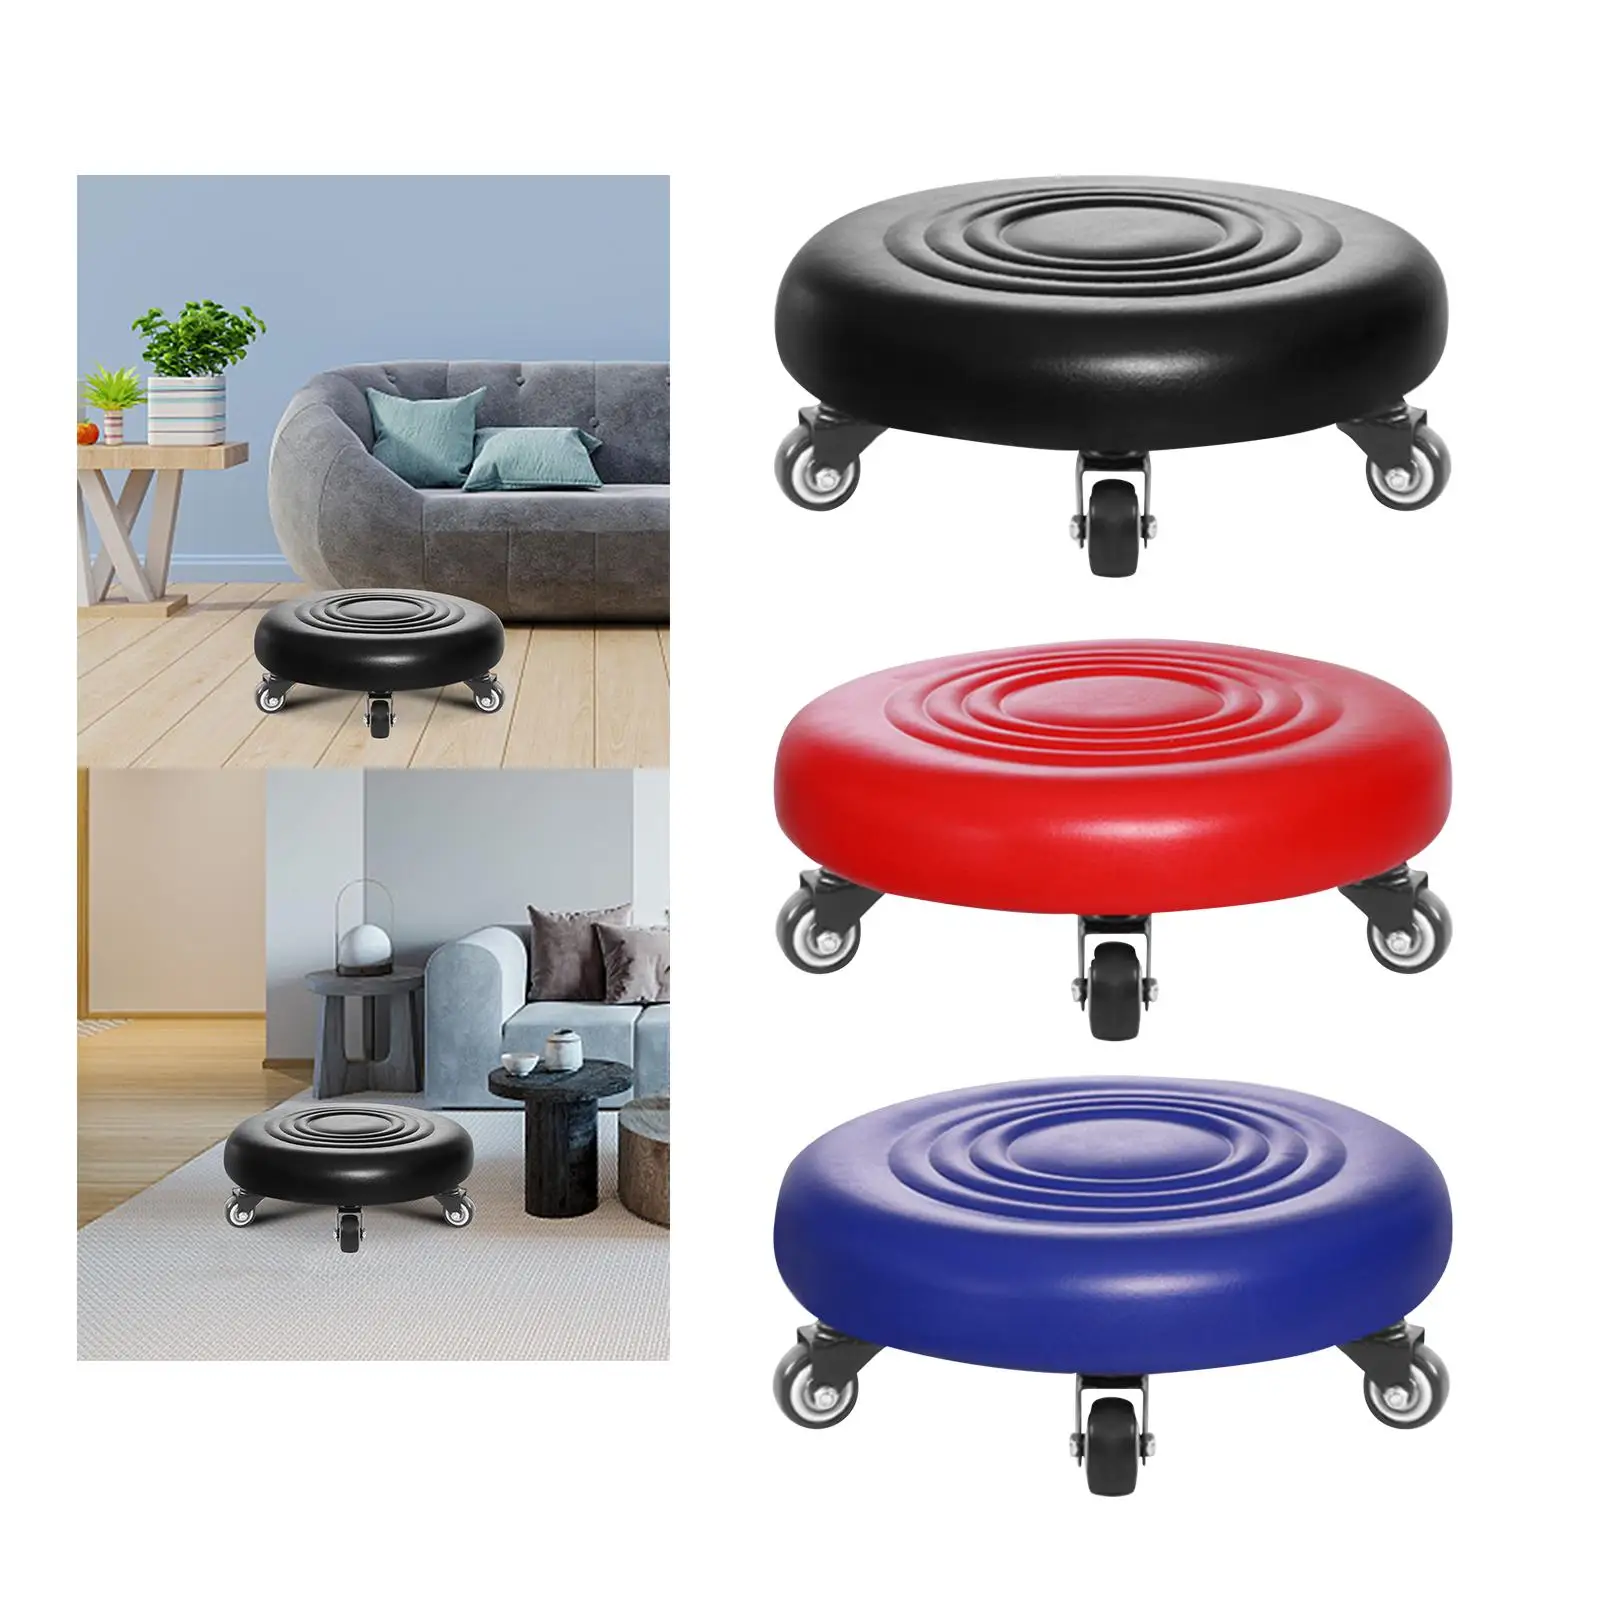 Round Low Roller Seat Stool Rolling Stool Comfortable Stool Pulley Ottoman Pulley Stool for Office Garden Home